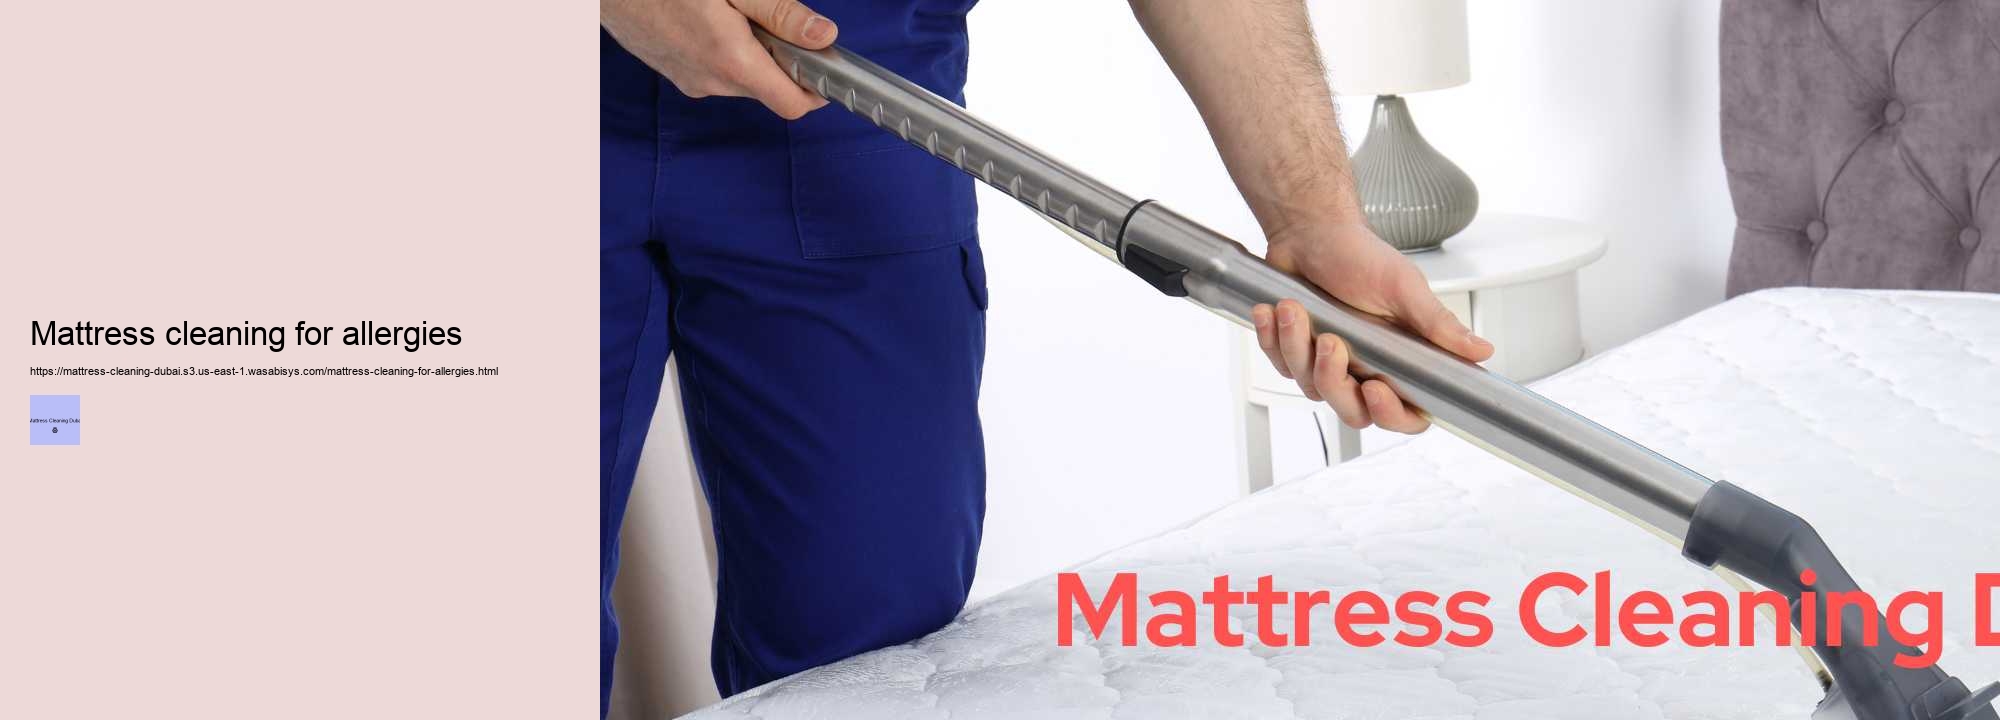 Mattress cleaning for kids